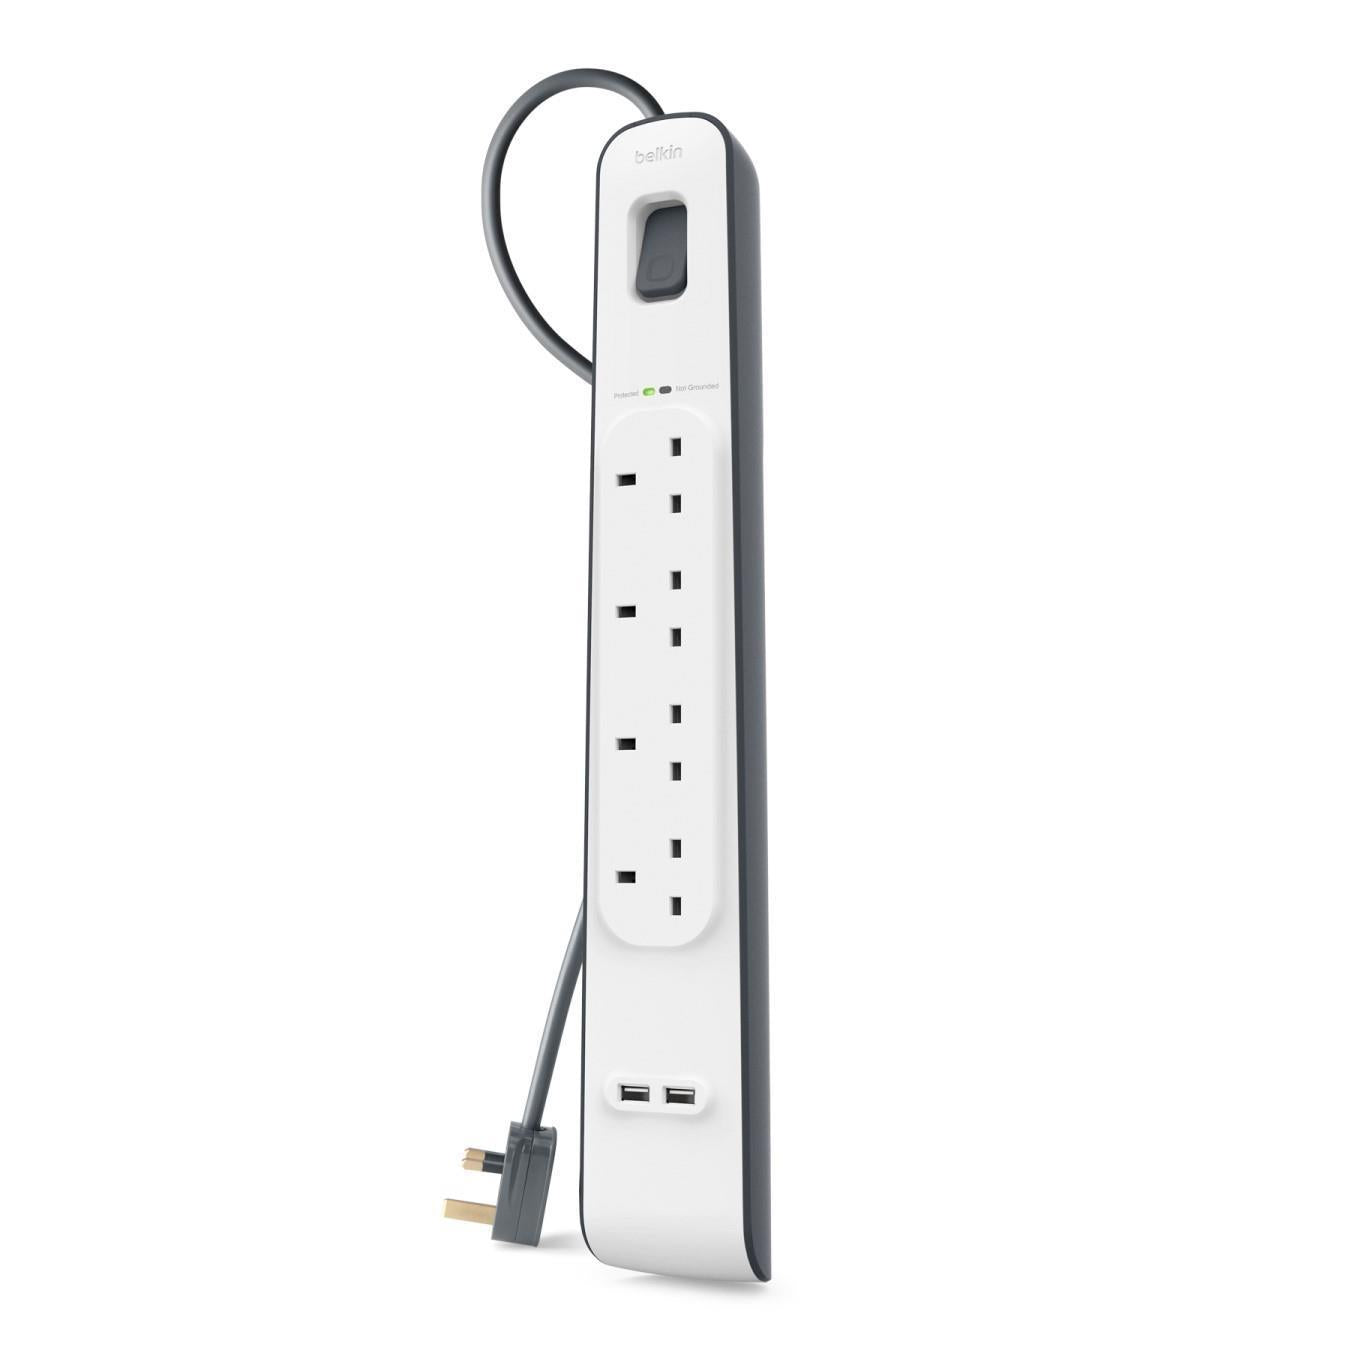 Belkin surge protector White 4 AC outlet(s) 2 m